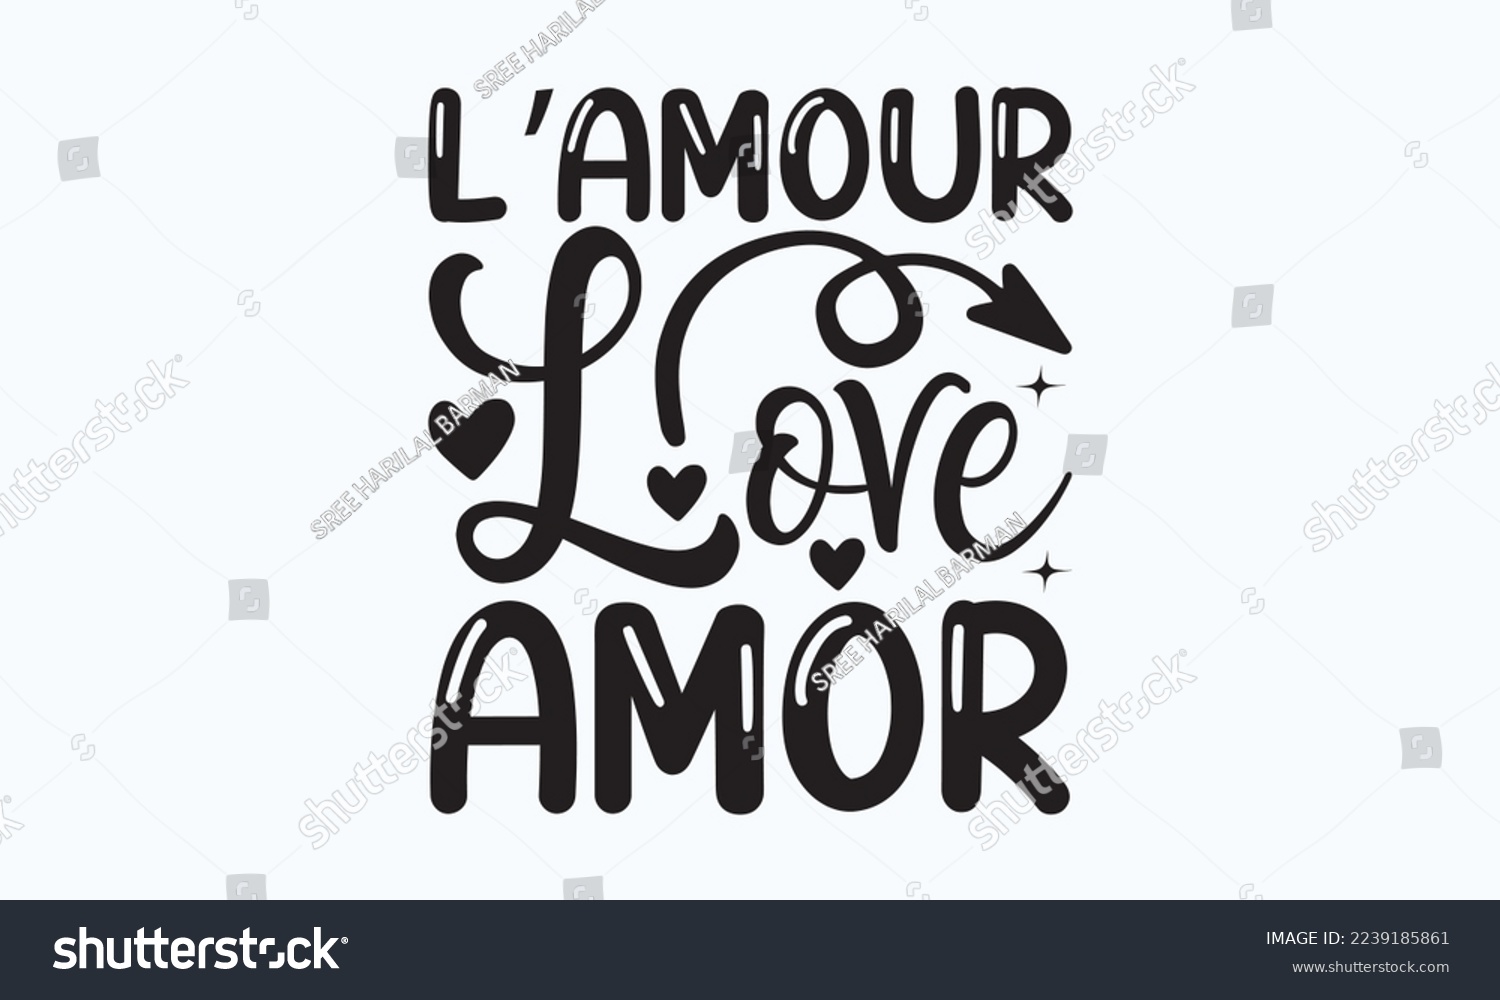 SVG of L’amour love amor - President's day T-shirt Design, File Sports SVG Design, Sports typography t-shirt design, For stickers, Templet, mugs, etc. for Cutting, cards, and flyers. svg